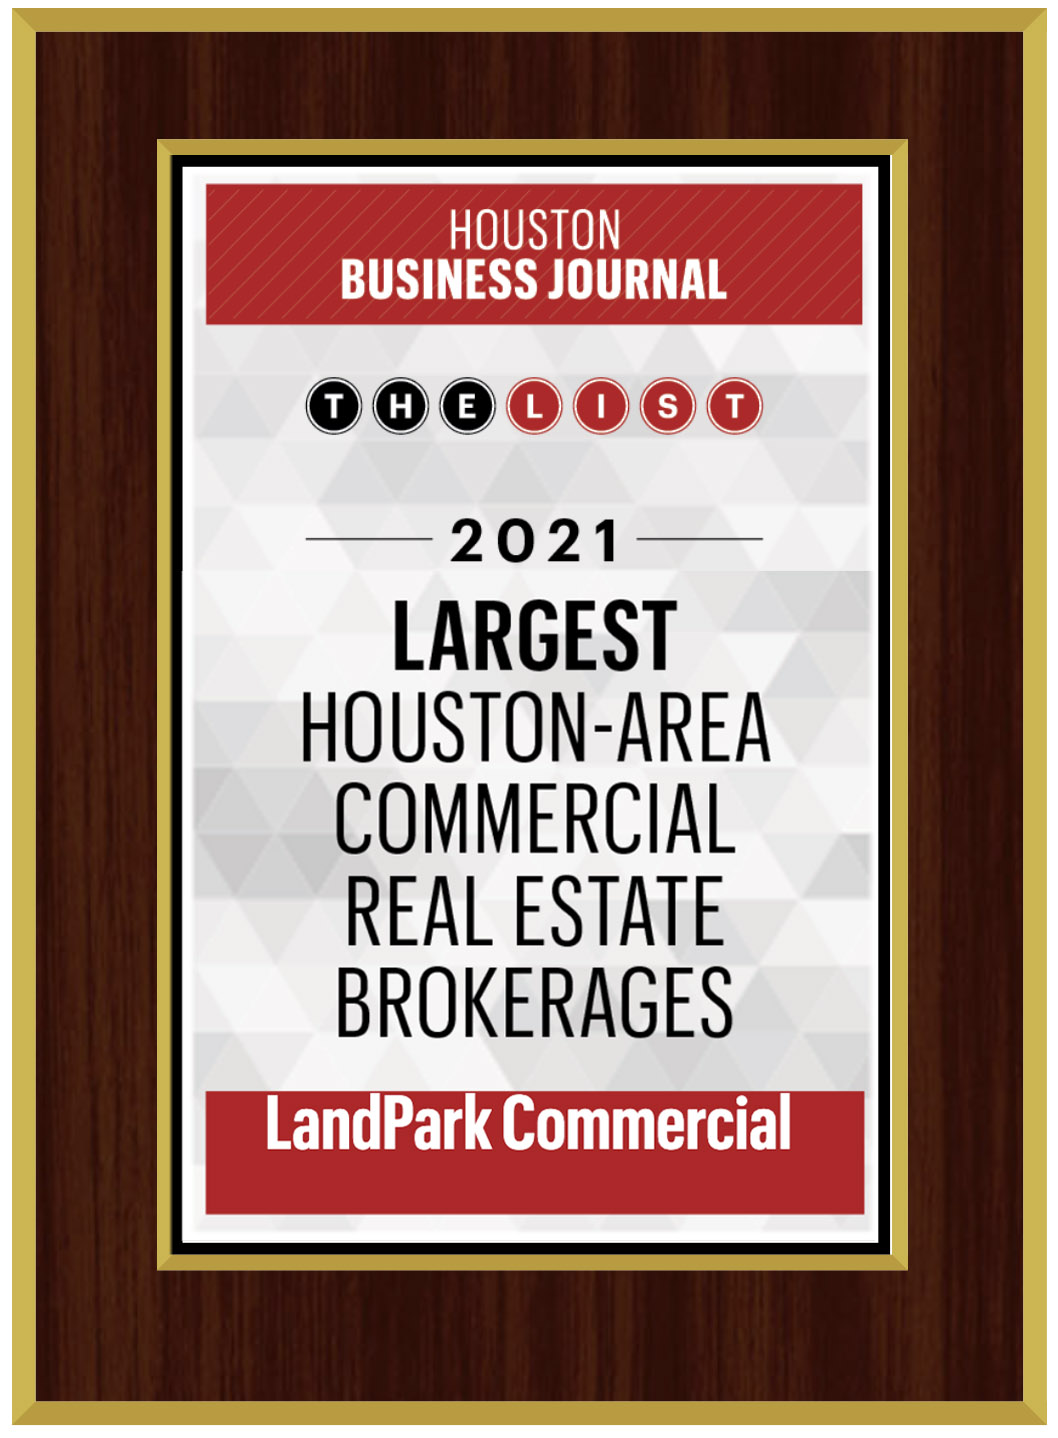 15 - Largest Houston Area Commercial Real Estate Brokerages